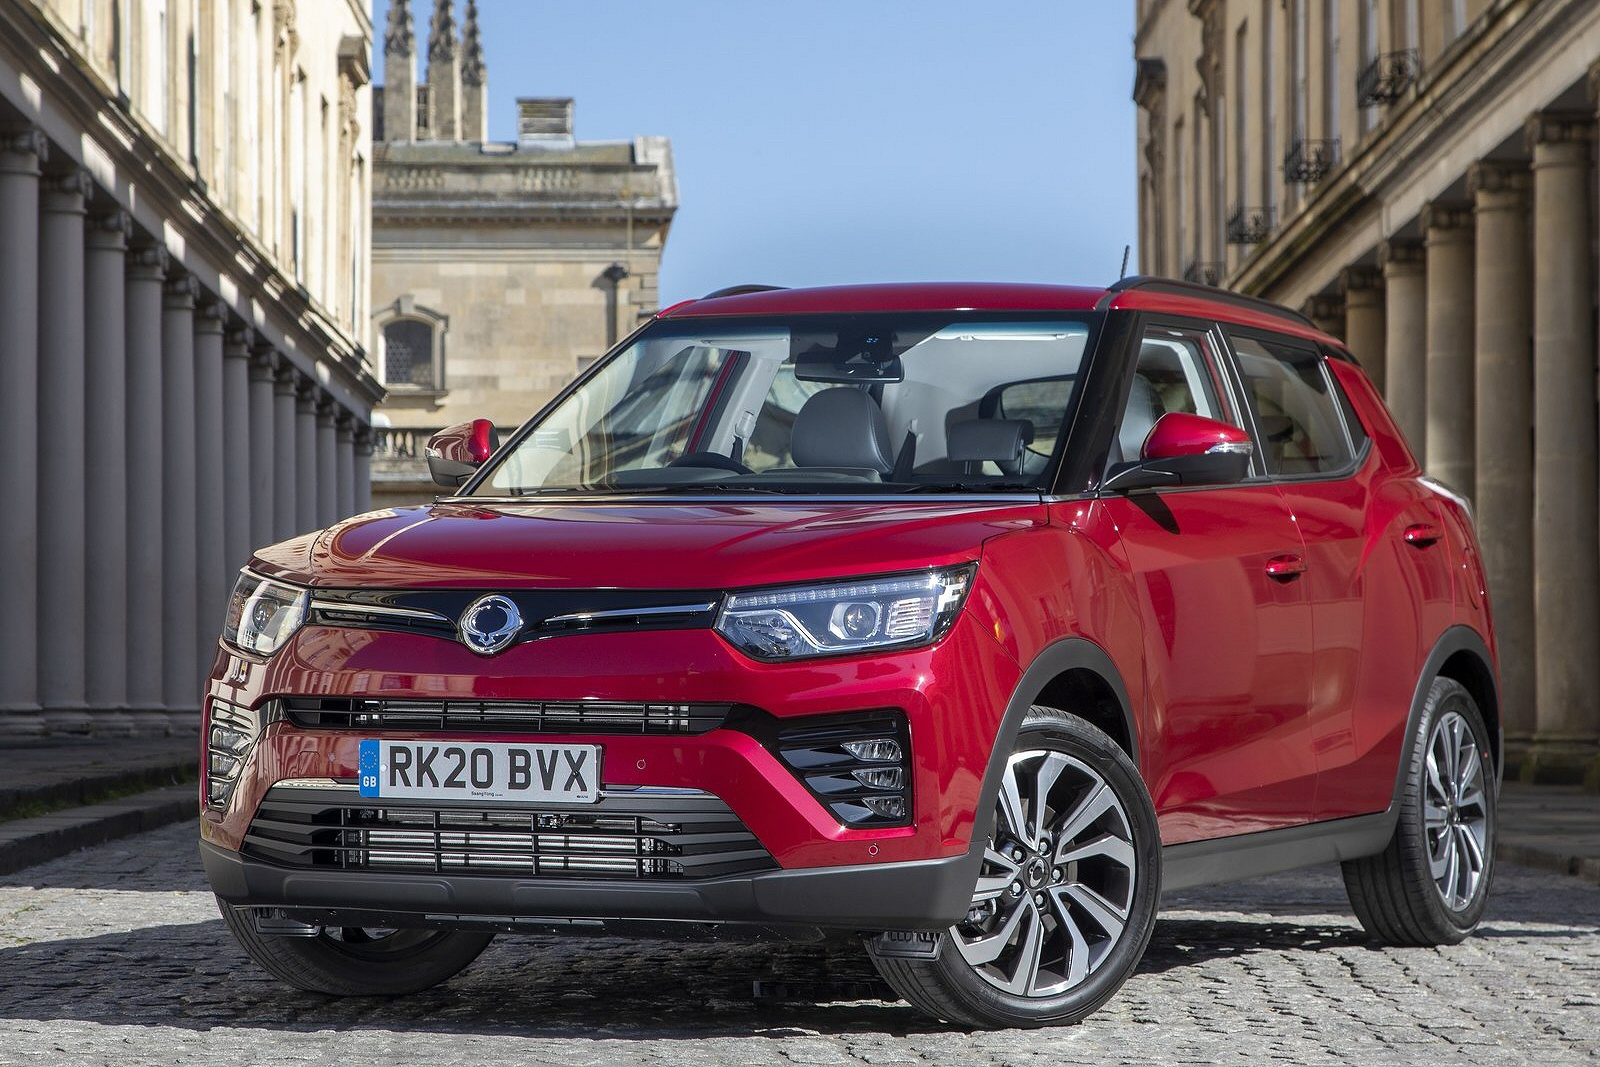 SSANGYONG Electric Lease